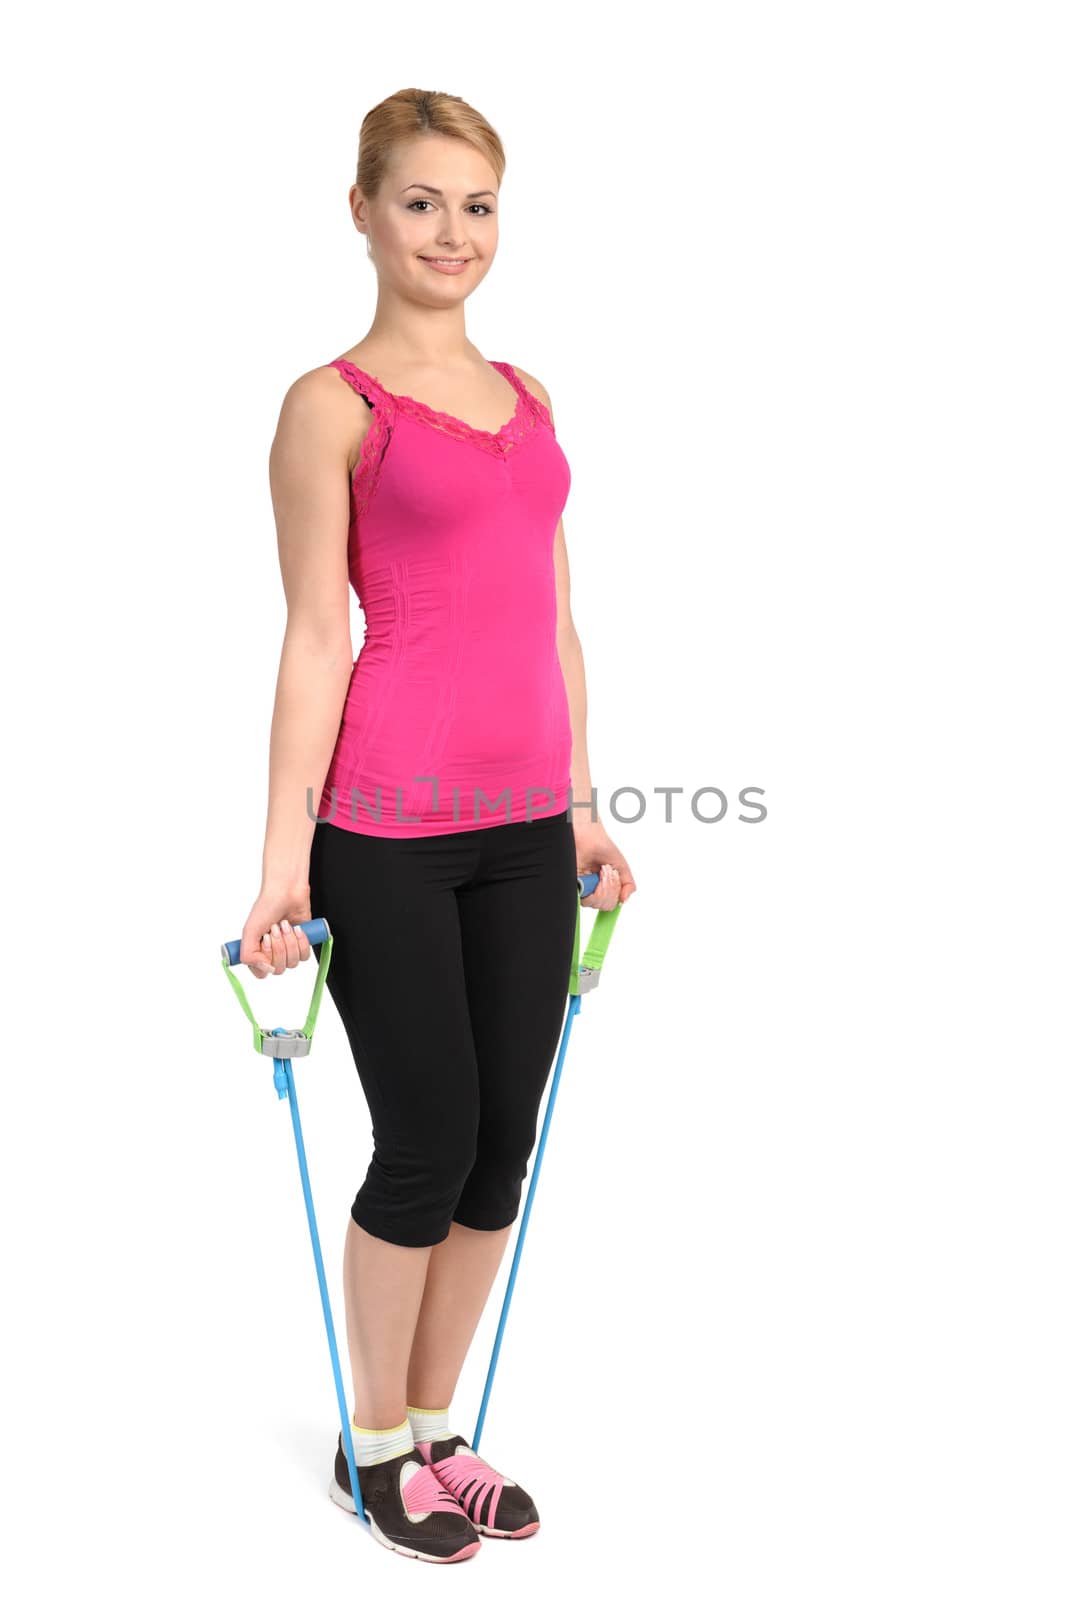 Young blond girl doing female biceps exercise using rubber resistance band. position 1 of 2.